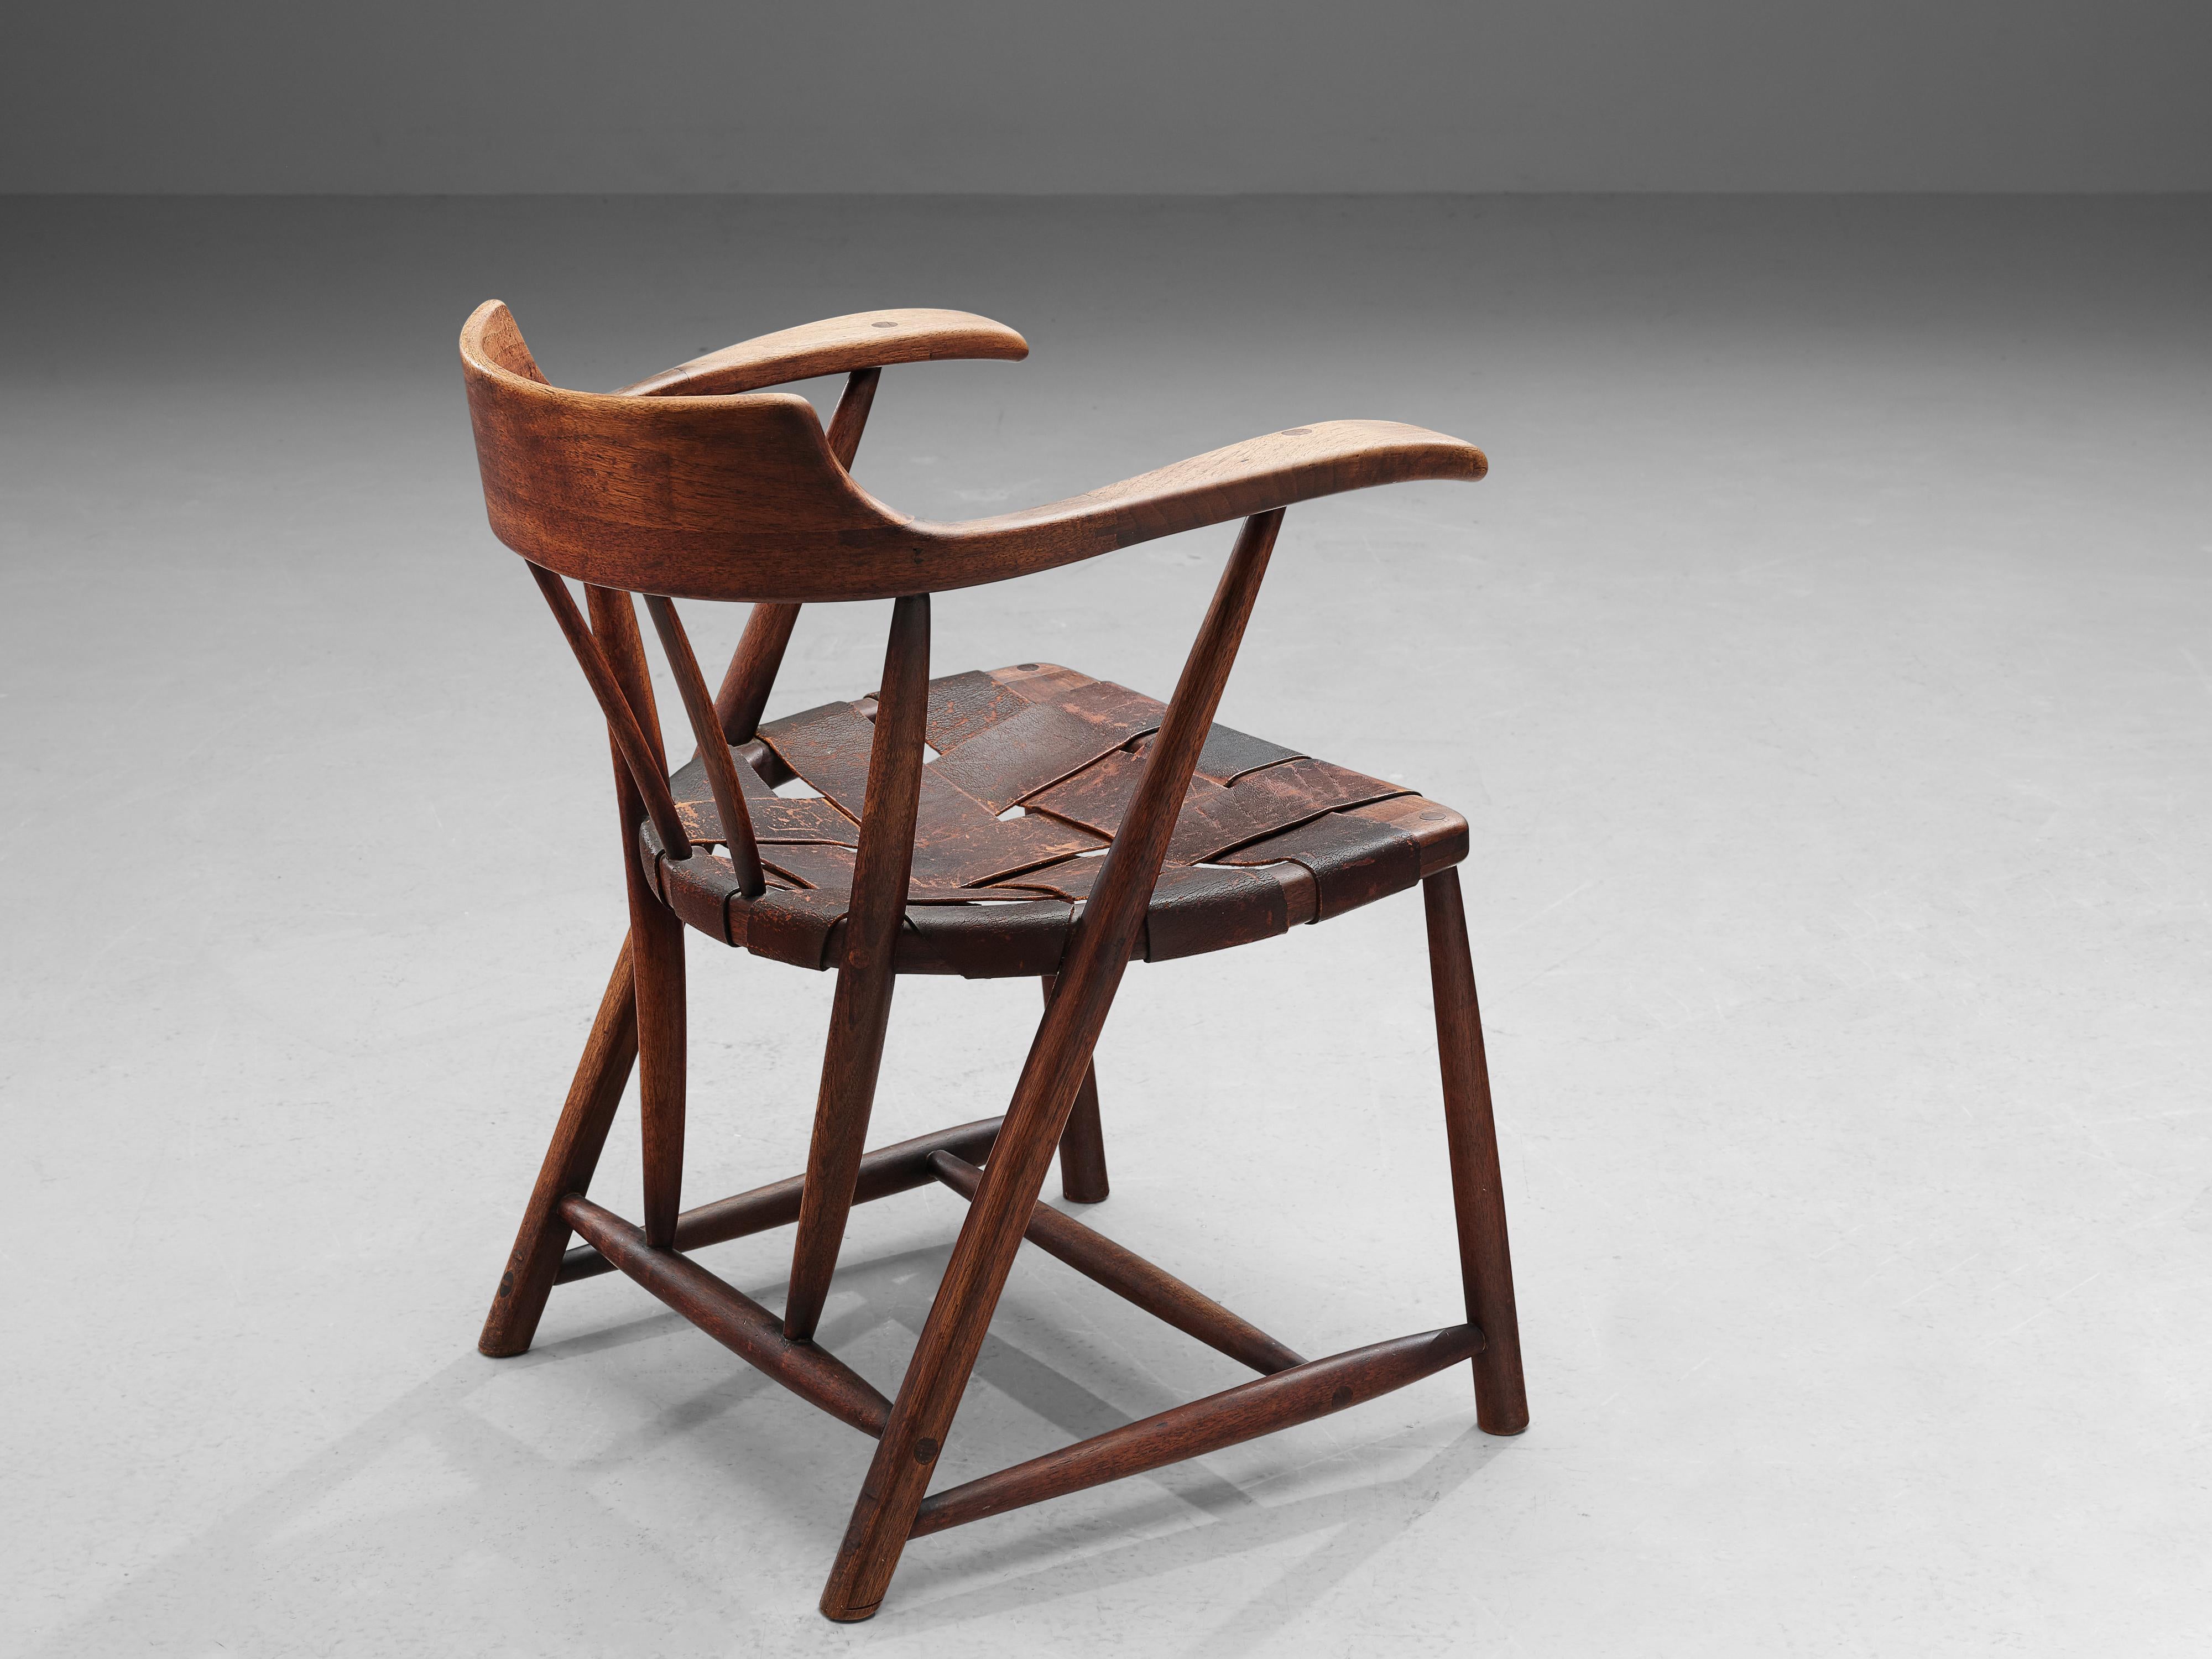 Wharton Esherick, ‘Captain’s Chair’, American walnut, brown leather, United States, 1951

This beautiful early ‘Captain’s Chair’ is a striking example of American designer Wharton Esherick’s oeuvre. The chair is one of the first ones ever made as